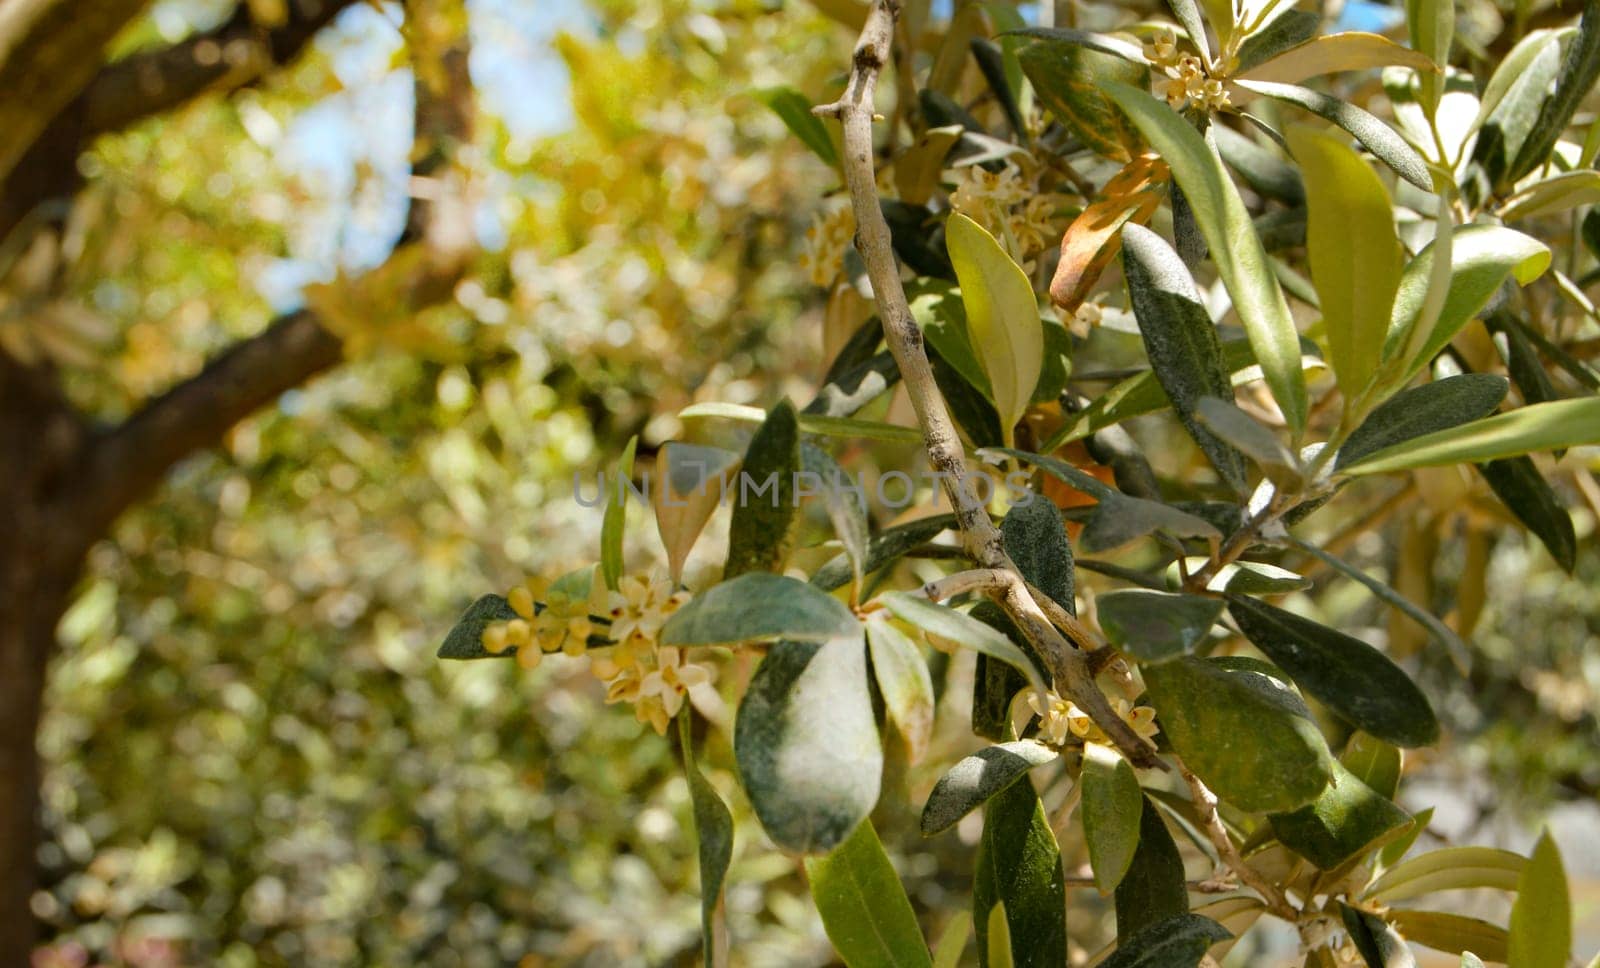 Background of olive leaves, flowering olive branches on a sunny day.